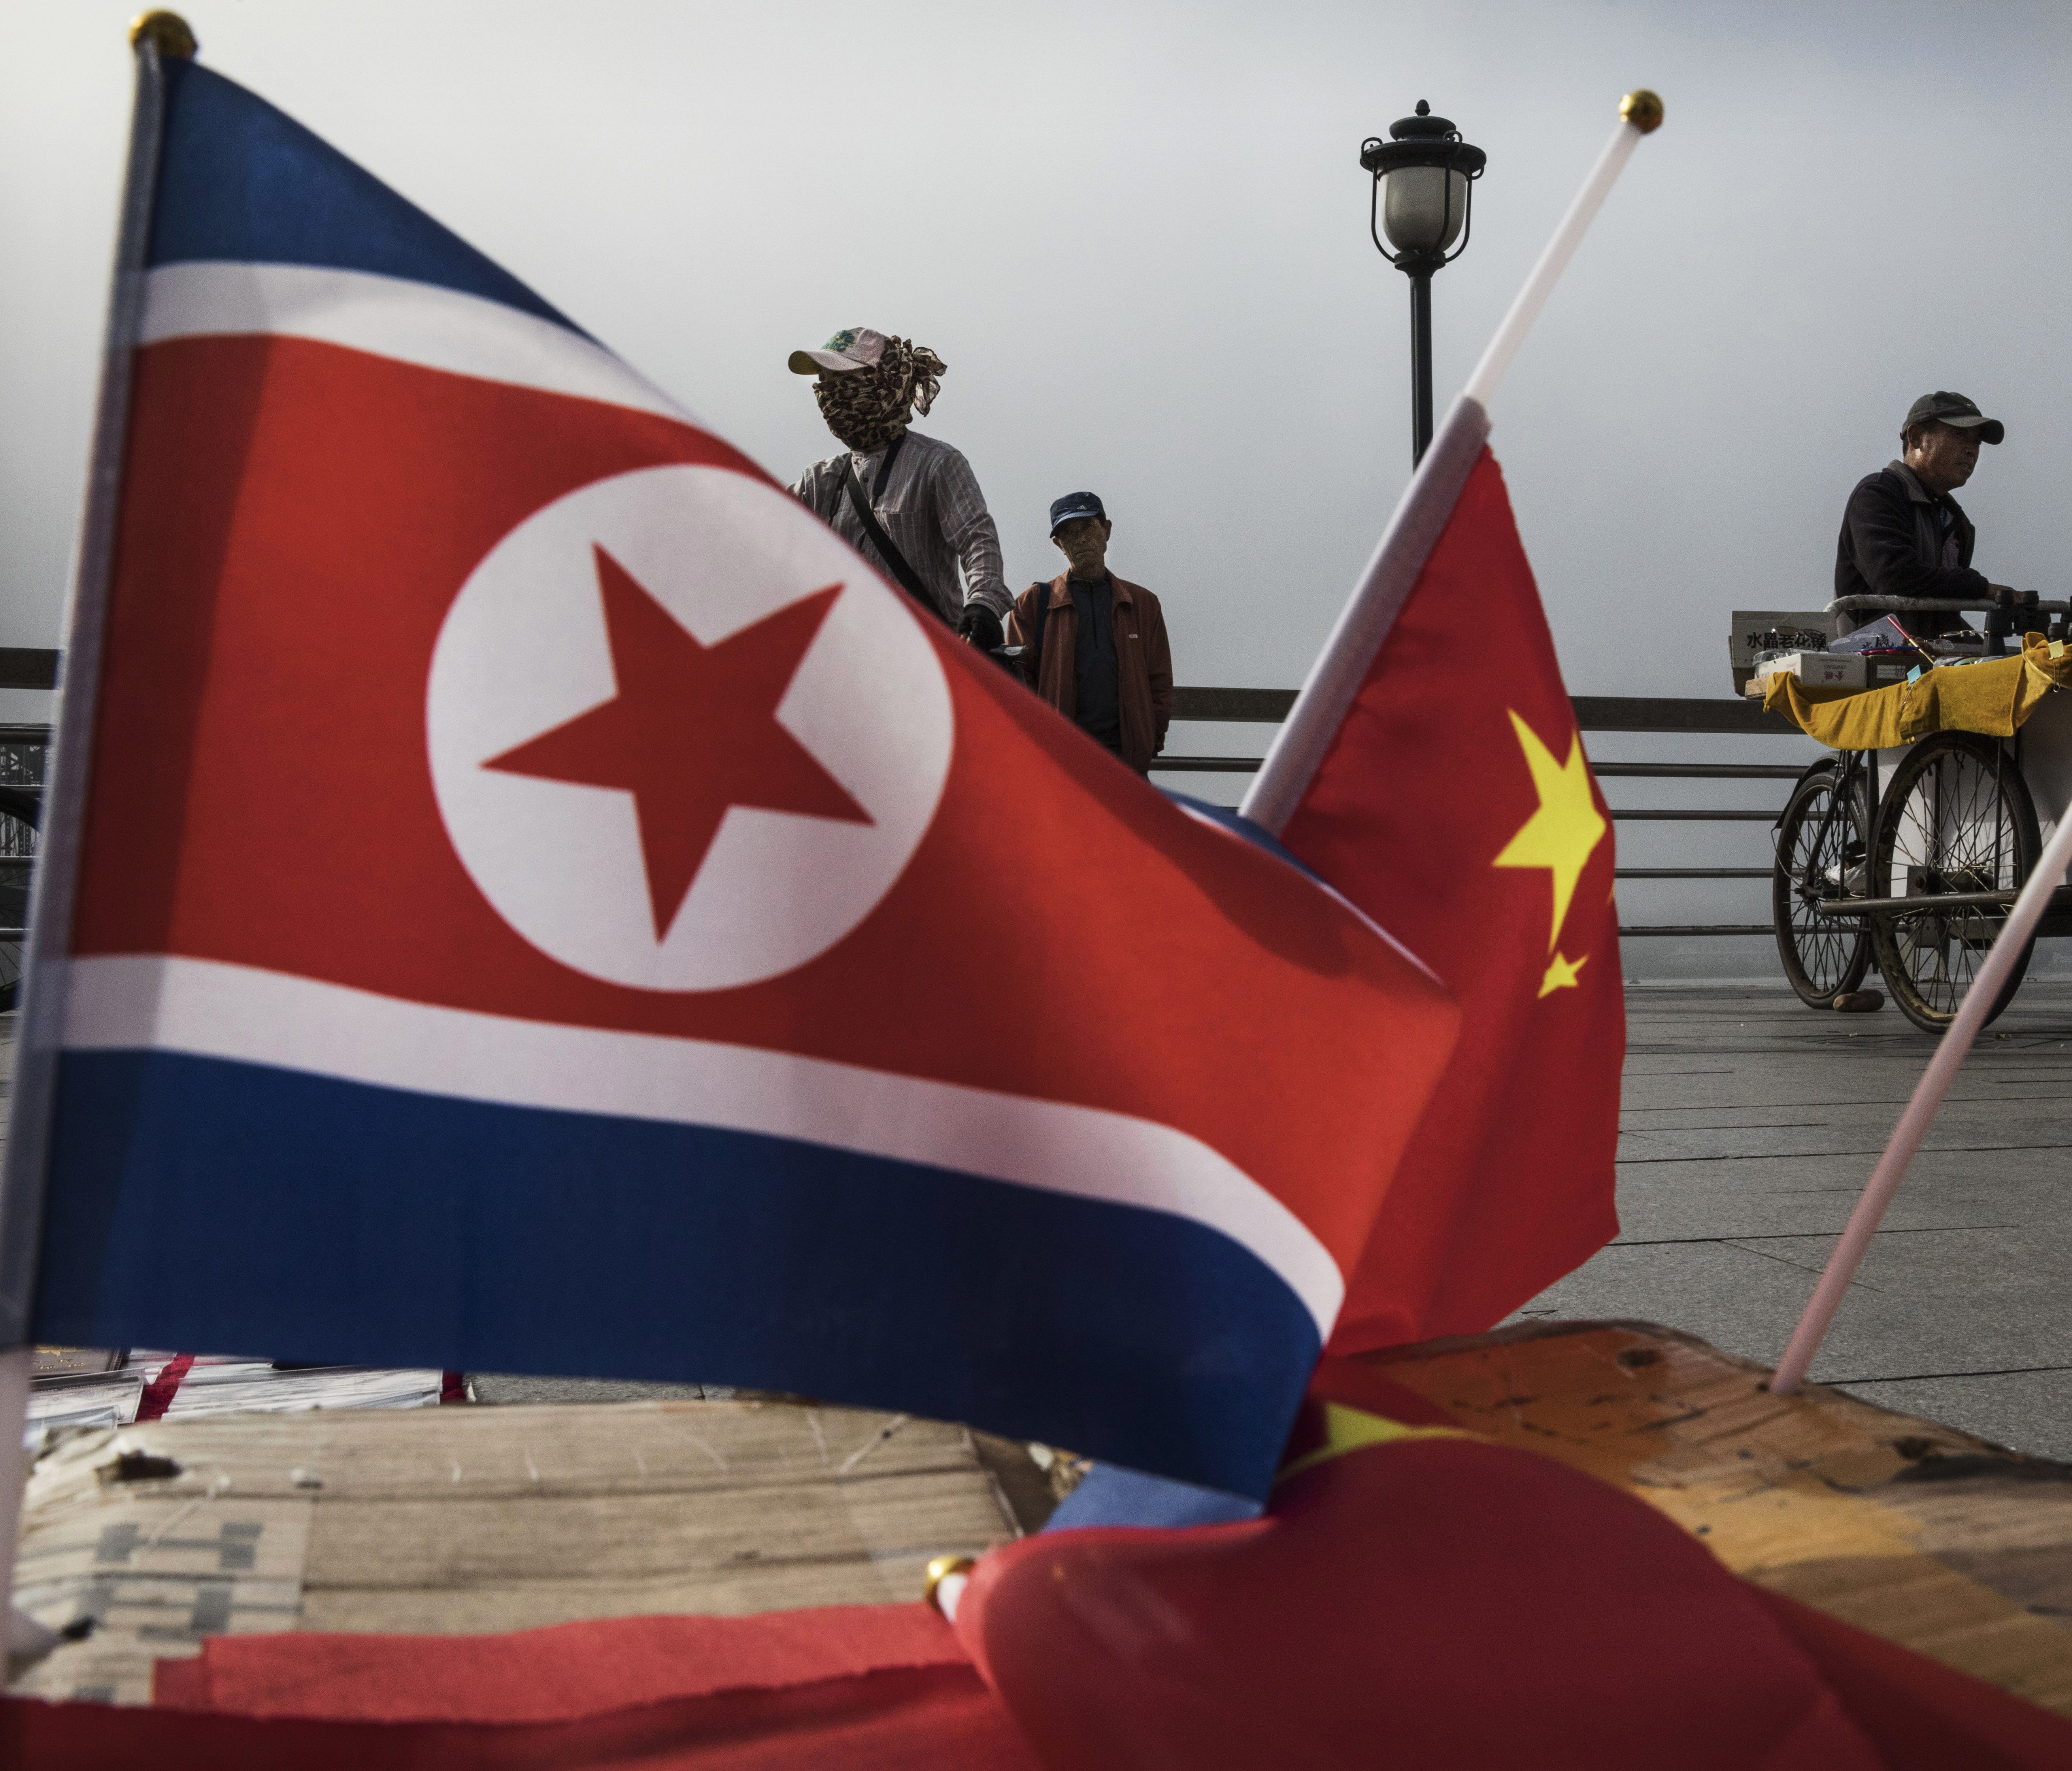 Chinese vendors are pictured selling North Korea and China flags on the boardwalk next to the Yalu river in the border city of Dandong, Liaoning province in northern China.